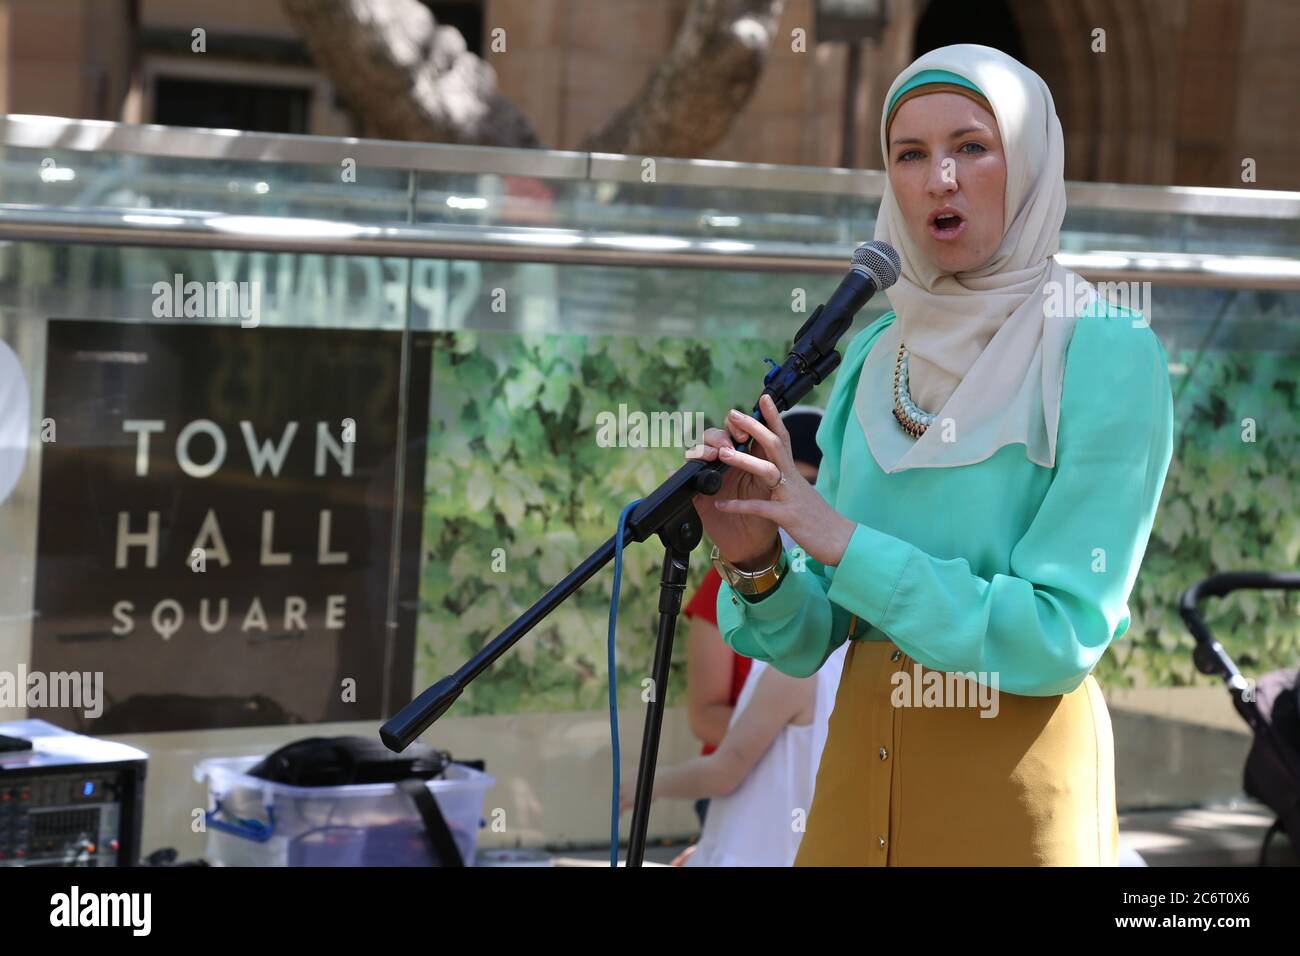 Muslim convert Rebecca Kay speaks at the rally against ‘Islamophobia’ outside Sydney Town Hall. She voiced concern about some attacks and incidents in Stock Photo